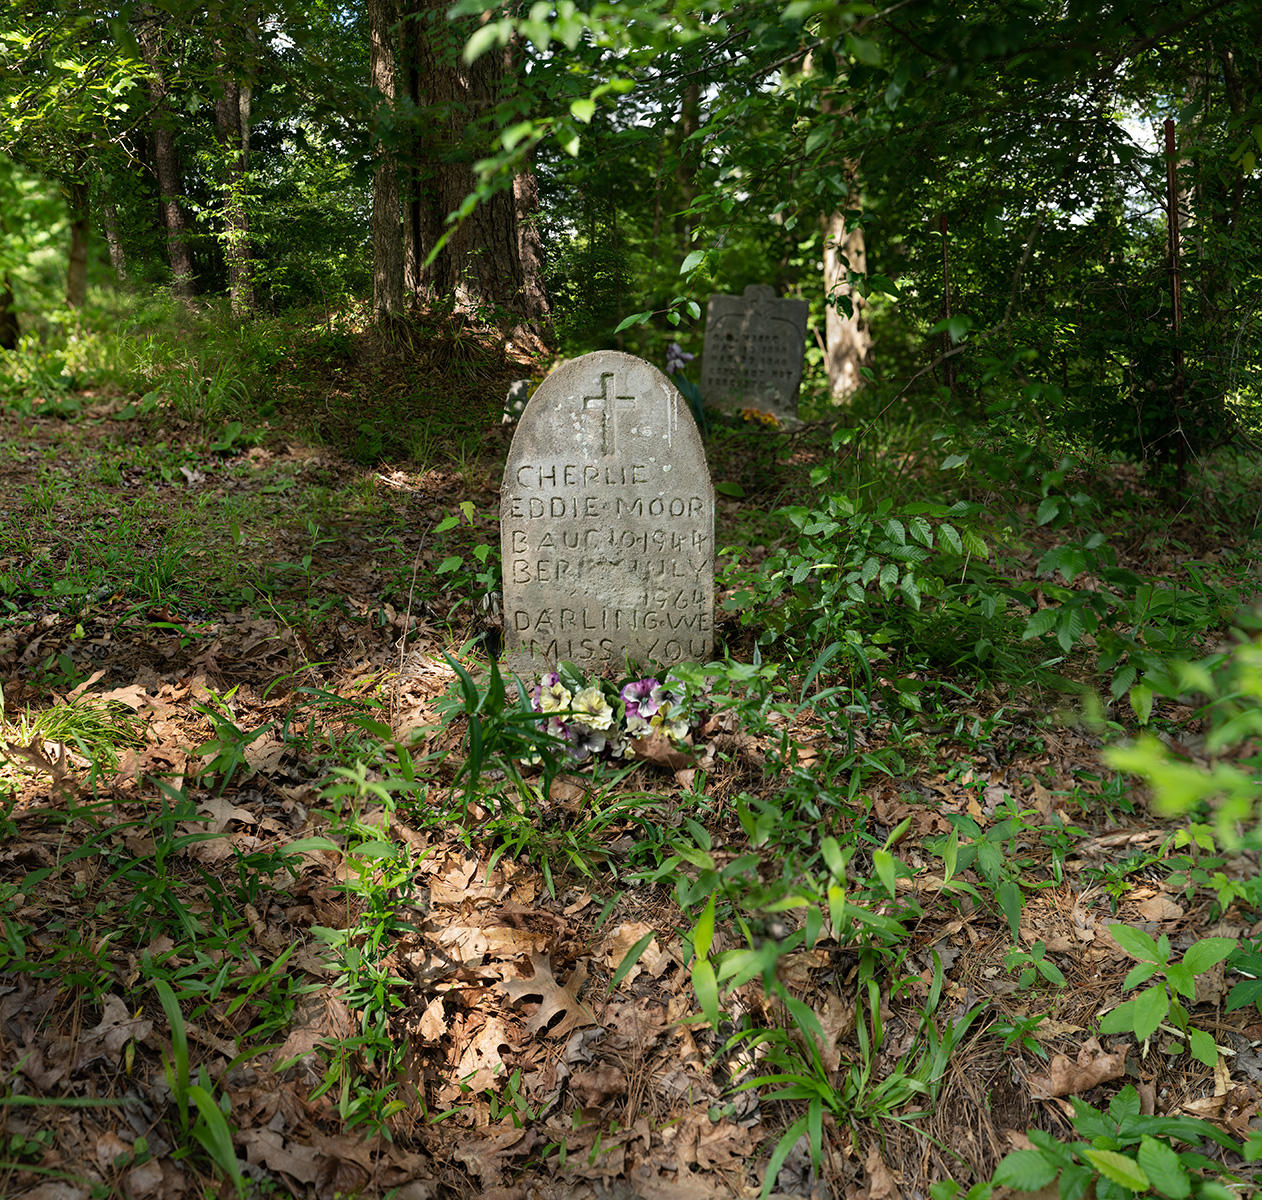 <div class="storycaption">
	<div class="galleryIntroTextArea holder">
		<div class="galleryIntroTextContent">
			<div class="galleryIntroTextContentInside">
				<div class="frishhead">
					GRAVESTONE OF LYNCHING VICTIM 
				</div>
				<div class="frishsubhead">
					MEADVILLE, MISSISSIPPI 
				</div>
				<div class="frishtext">
					On May 2, 1964, teenagers Charles Eddie Moore and Henry Dee were picked up by KKK members while hitchhiking from the Tastee Treat Drive-In in Meadville, Mississippi. They were interrogated and tortured in a nearby forest, locked in a trunk of a car, driven across state lines, chained to a Jeep motor block and train rails, and dropped alive into the Mississippi River to die. Charles Eddie Moore's poignantly humble homemade gravestone is in an overgrown corner of the Mount Olive Missionary Baptist Church cemetery in Meadville, Mississippi. It reads: "Cherlie Eddie Moor; Baud Aug 10, 1944; Beried July 1964; Darling, we will miss you." Obscured by the flowers, written on the base, is added "Anywhere in Glory Is All Right." 
				</div>
				<div class="frishdate">
					PHOTOGRAPHED: 2019 
				</div>
			</div>
		</div>
	</div>
</div> : IMAGES : Ghosts of Segregation